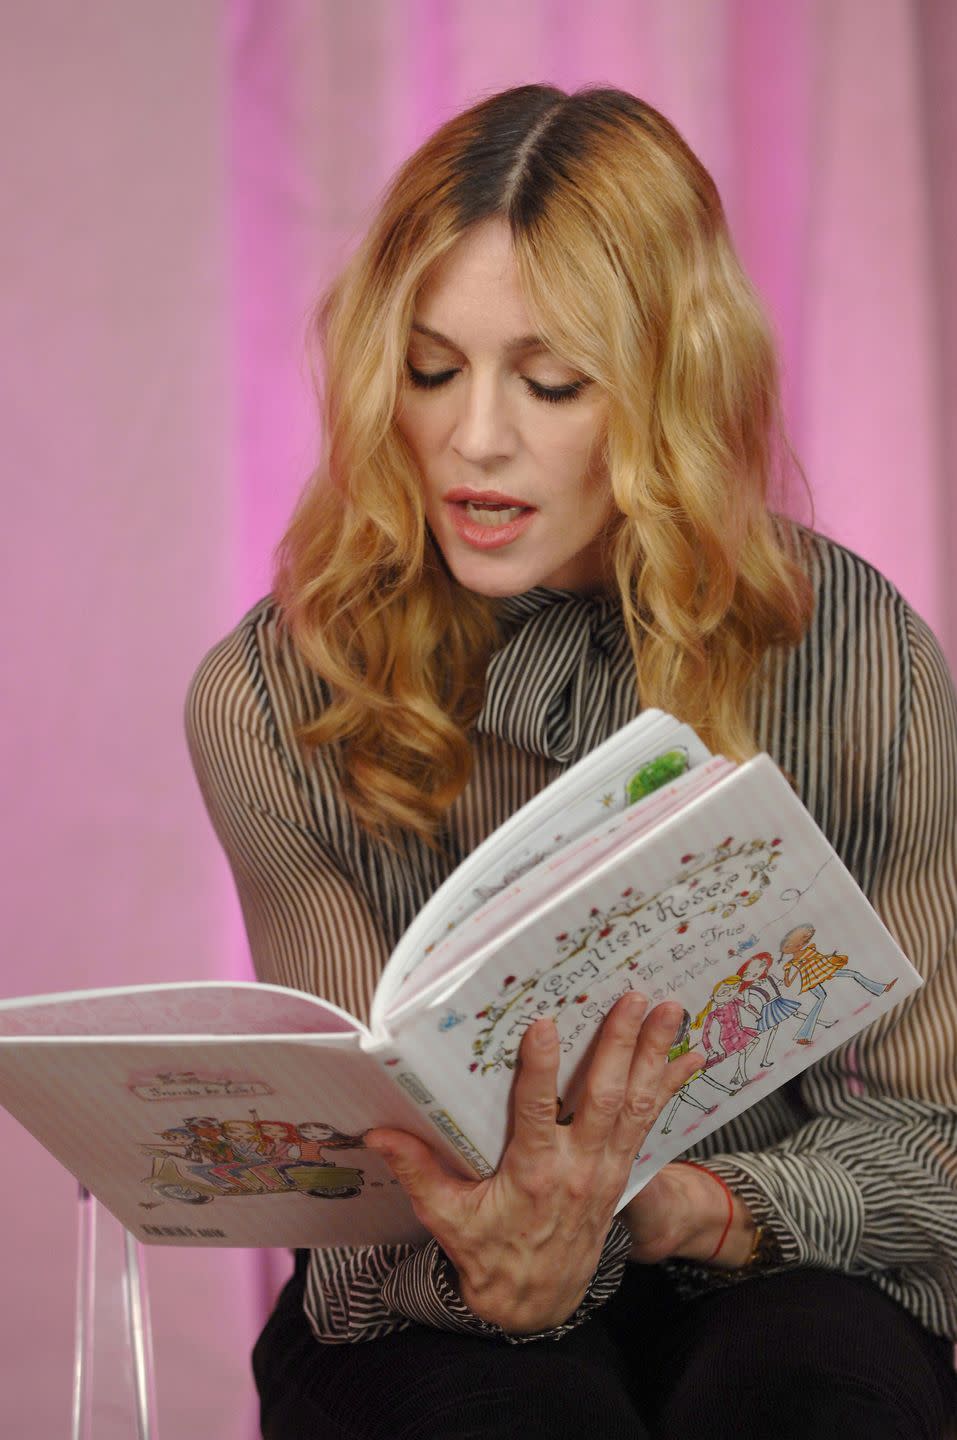 <p>Madonna has worked on 30 books—11 coffee table books, 12 chapter books, and seven picture books for kids. In terms of her writing career, the Grammy and Academy Award winner is probably best known for her <em>English Roses</em> series, the first of which was published in 2003. </p><p>The books follow the friendship of five girls, and the ups and downs that come with it, and are named after group of friends Madonna's daughter plays with at school, she told <em><a href="https://www.publishersweekly.com/pw/by-topic/authors/interviews/article/33935-mum-s-the-word-pw-talks-with-madonna.html" rel="nofollow noopener" target="_blank" data-ylk="slk:Publishers Weekly" class="link rapid-noclick-resp">Publishers Weekly</a></em>. The idea for the series was planted by the Queen of Pop's Kabbalah teacher, who suggested she write children's books to "share the wisdom you've gained as an adult." The first book in the series debuted at number one on the <em><a href="https://sanoma.com/release/madonnas-book-the-english-roses-debuts-at-no-1-on-the-new-york-times-childrens-best-seller-list/" rel="nofollow noopener" target="_blank" data-ylk="slk:New York Times" class="link rapid-noclick-resp">New York Times</a></em> children's bestsellers list. <br></p><p><a class="link rapid-noclick-resp" href="https://www.amazon.com/English-Roses-Madonna/dp/0670036781?tag=syn-yahoo-20&ascsubtag=%5Bartid%7C2140.g.33987725%5Bsrc%7Cyahoo-us" rel="nofollow noopener" target="_blank" data-ylk="slk:Buy the Book">Buy the Book</a></p>